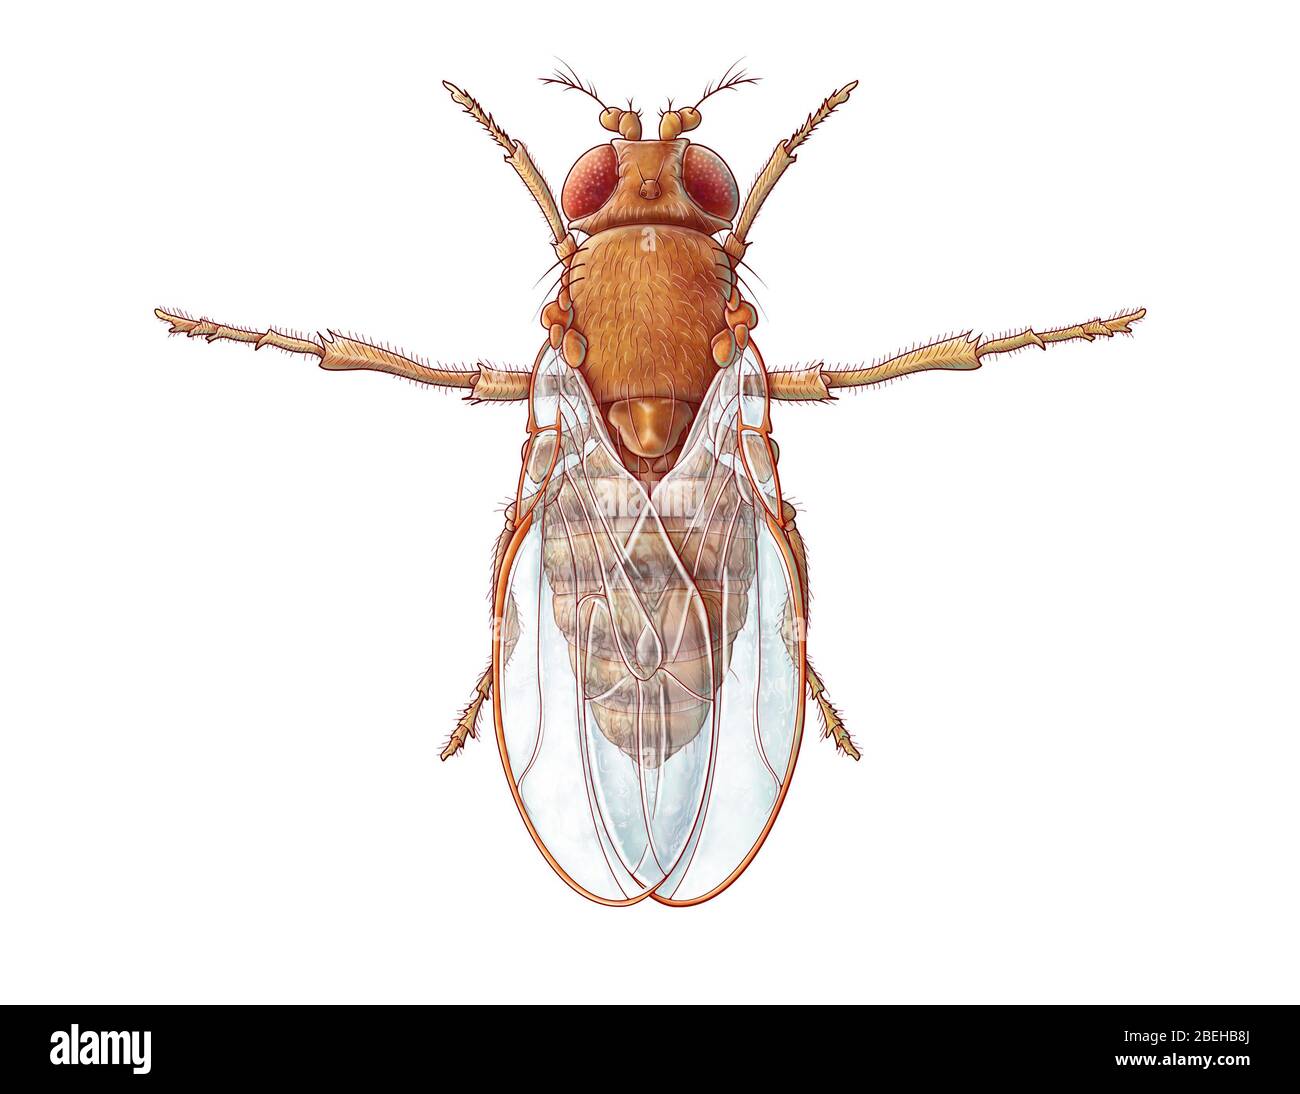 An illustration of the common fruit fly, also known as Drosophila melanogaster. While fruit flies are common household pests, they are also used by researchers to study genetics, physiology, pathology, and evolution. Stock Photo